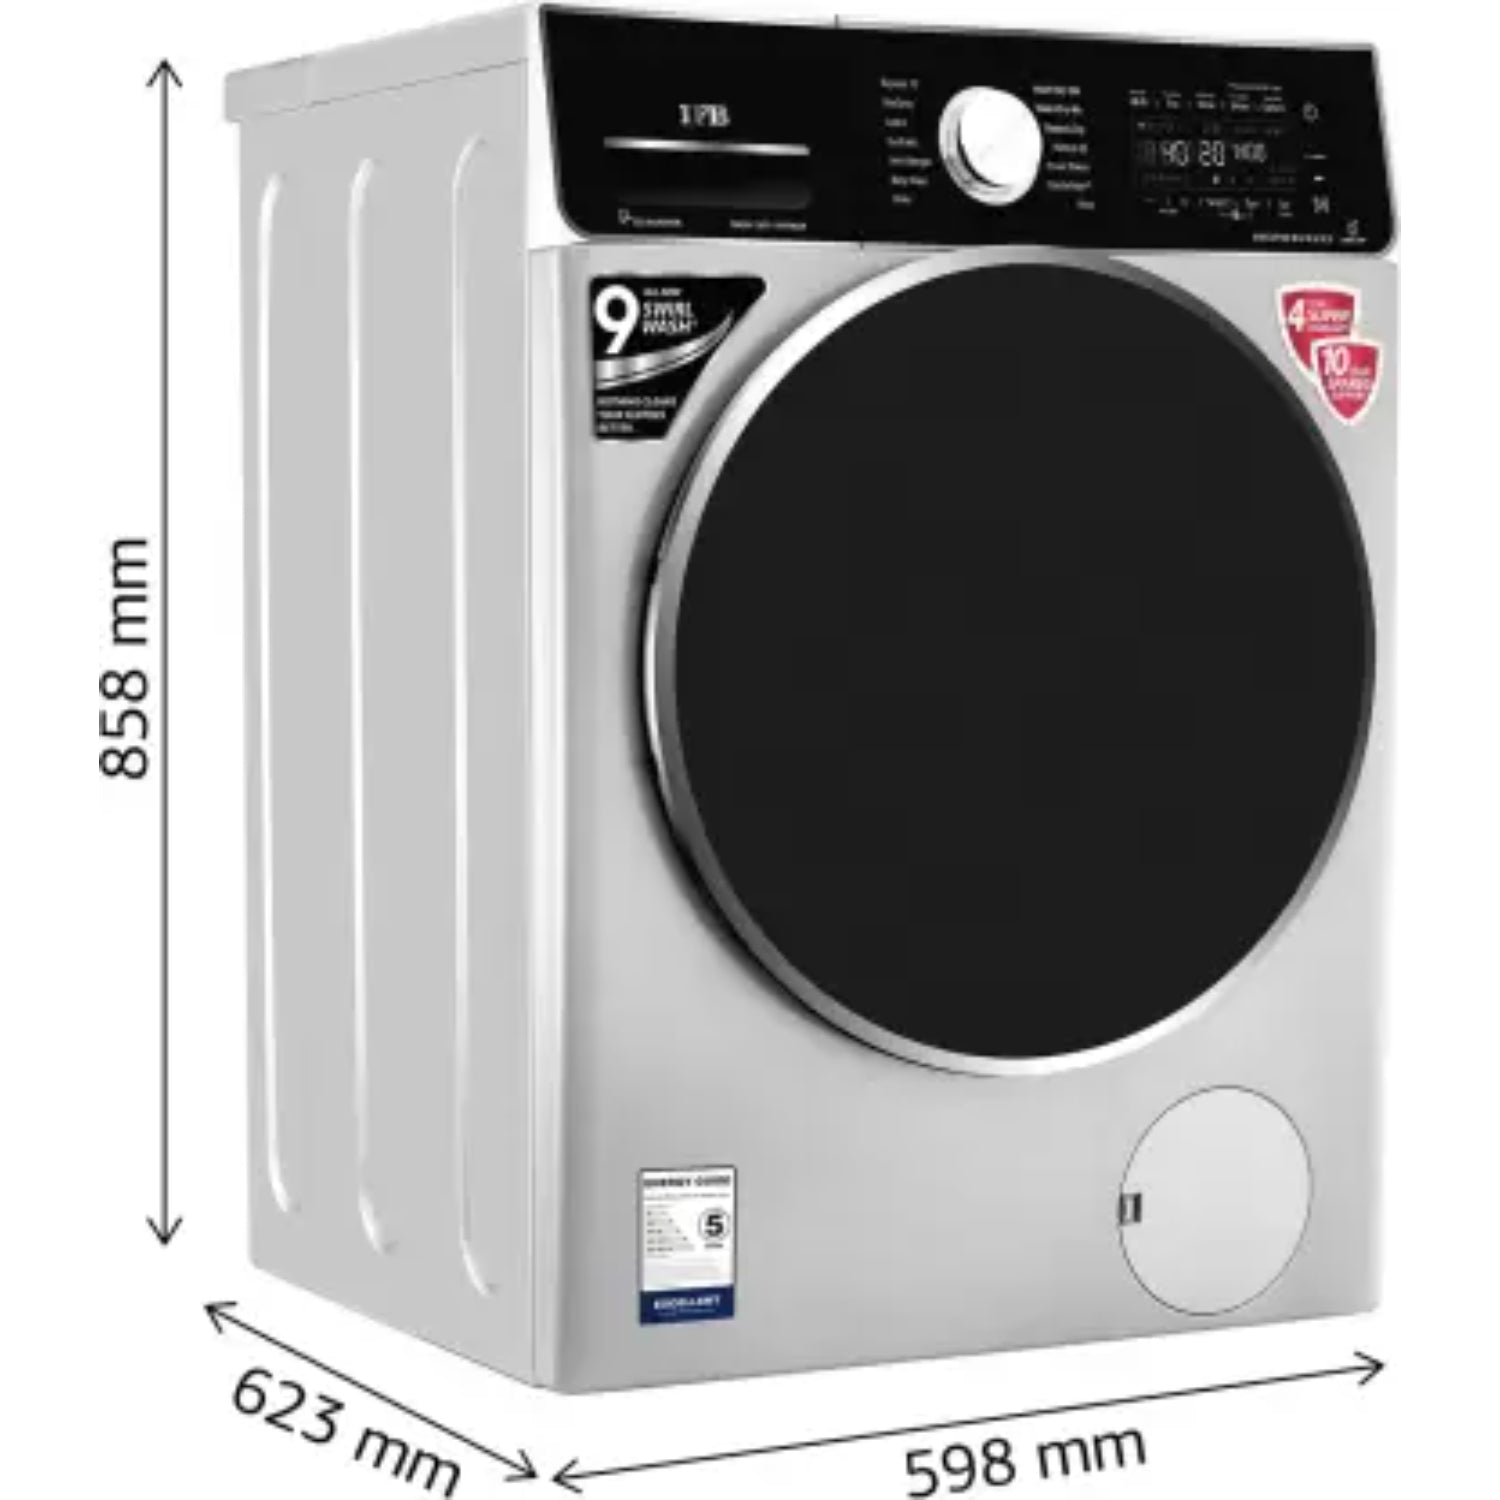 IFB 8.5/6.5 kg WD EXECUTIVE ZXS Washer Dryer Refresher